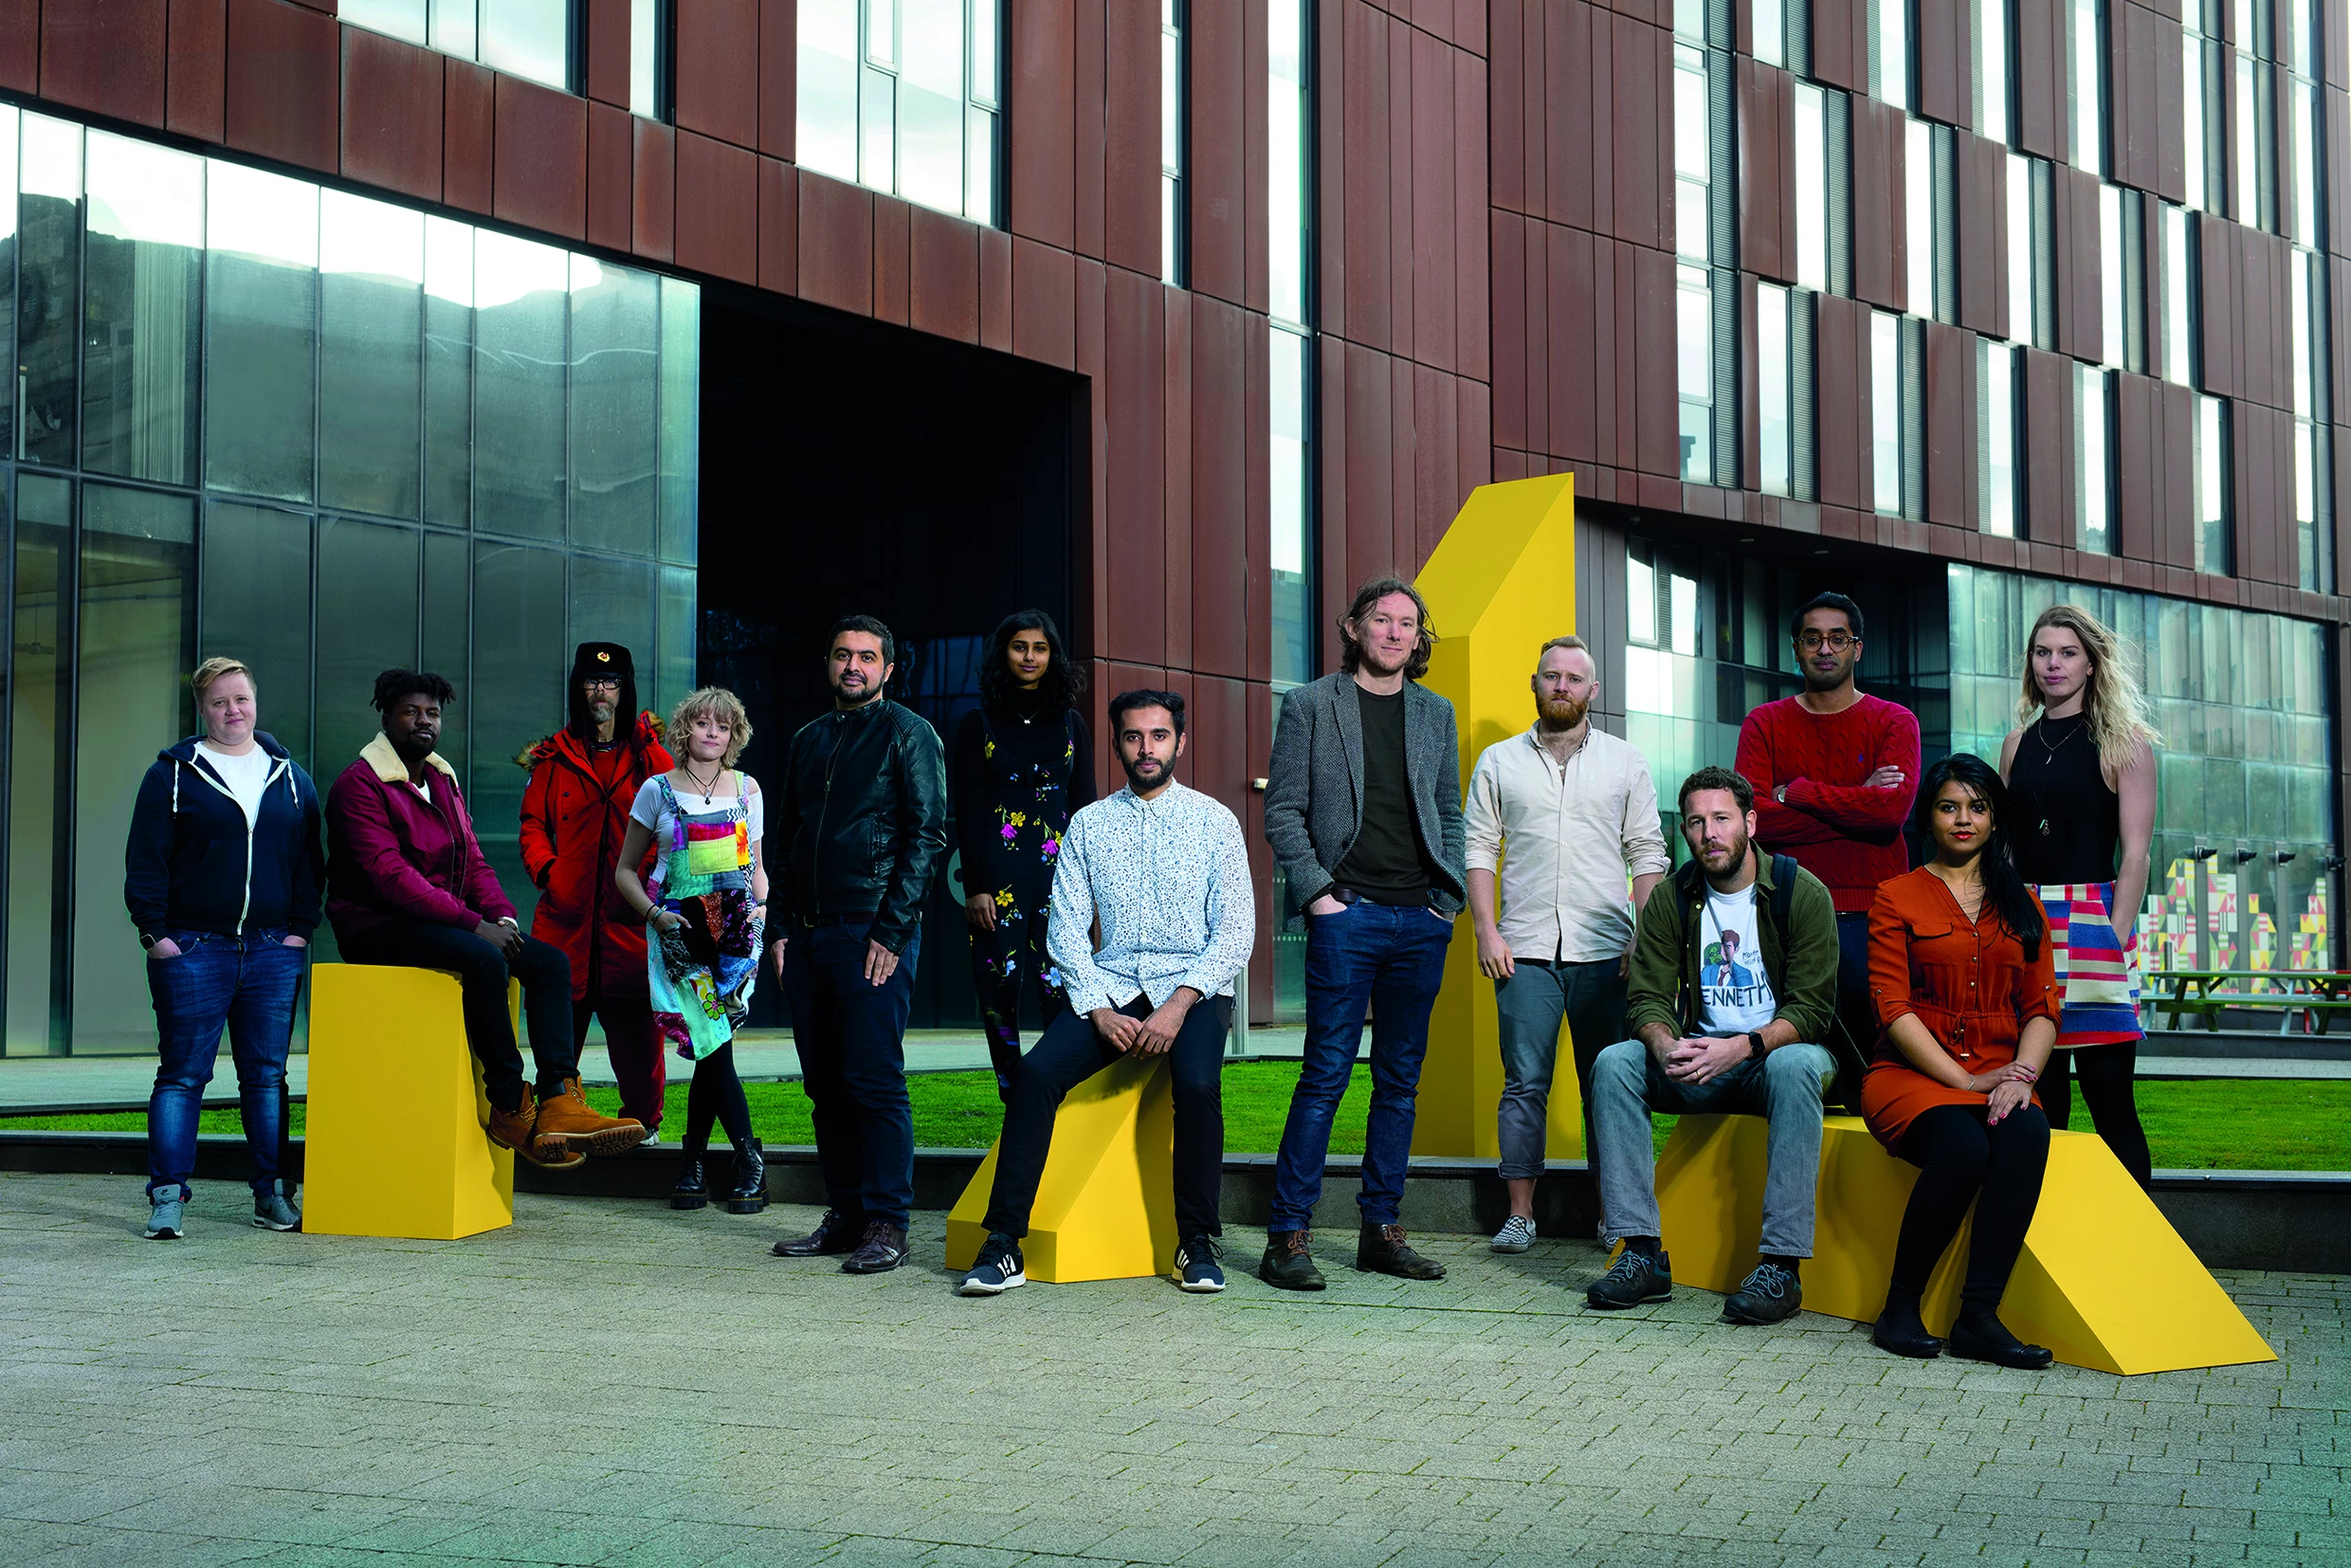 #4Sparks is a campaign launch to attract Channel 4 to the region backed by young creatives from Bradford, York, Huddersfield and Leeds.